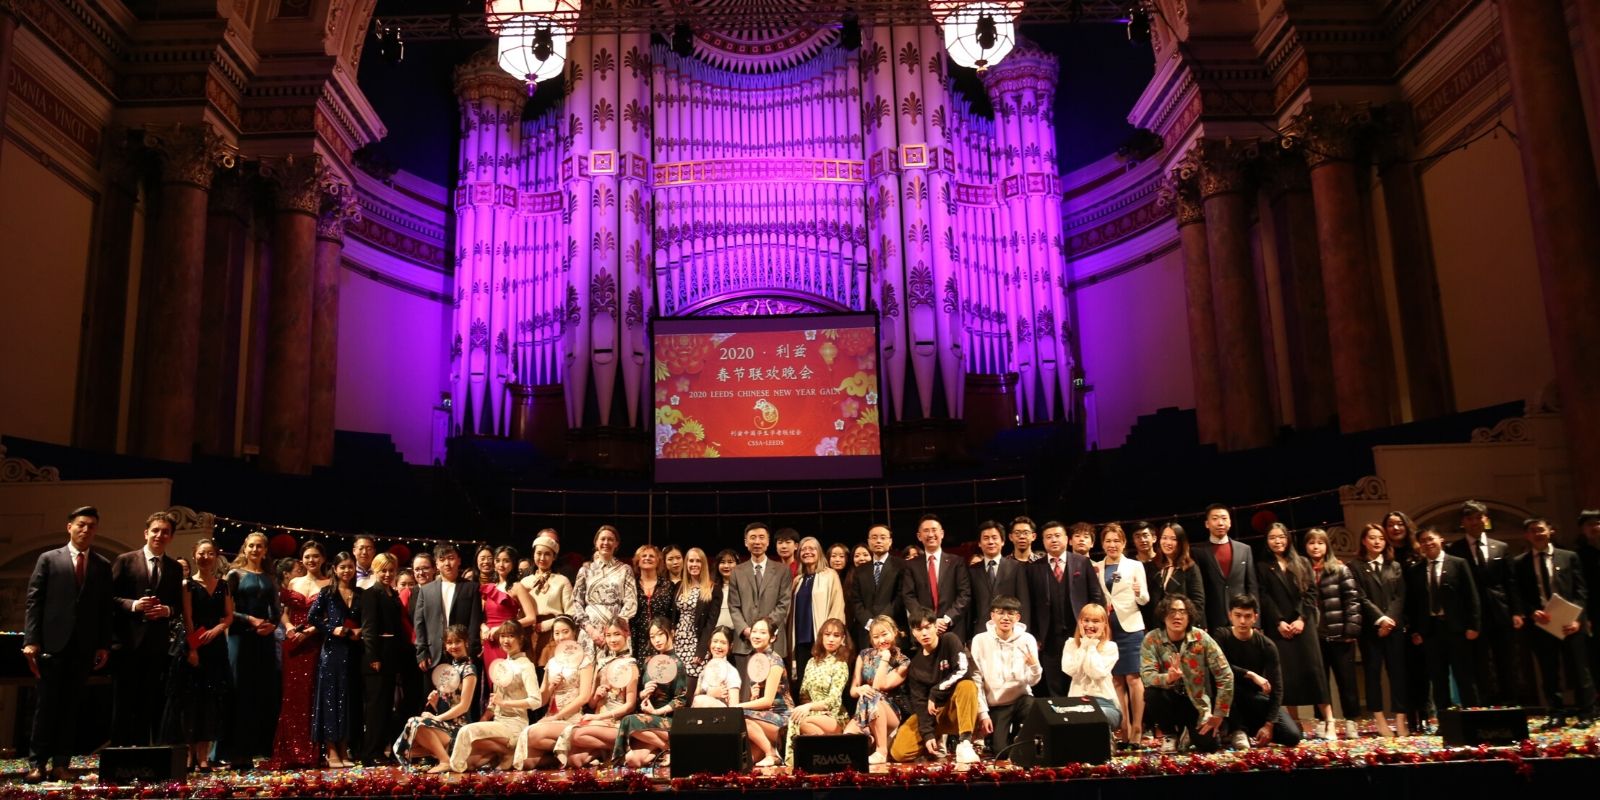 All performers and special guests on the stage at Leeds Town Hall